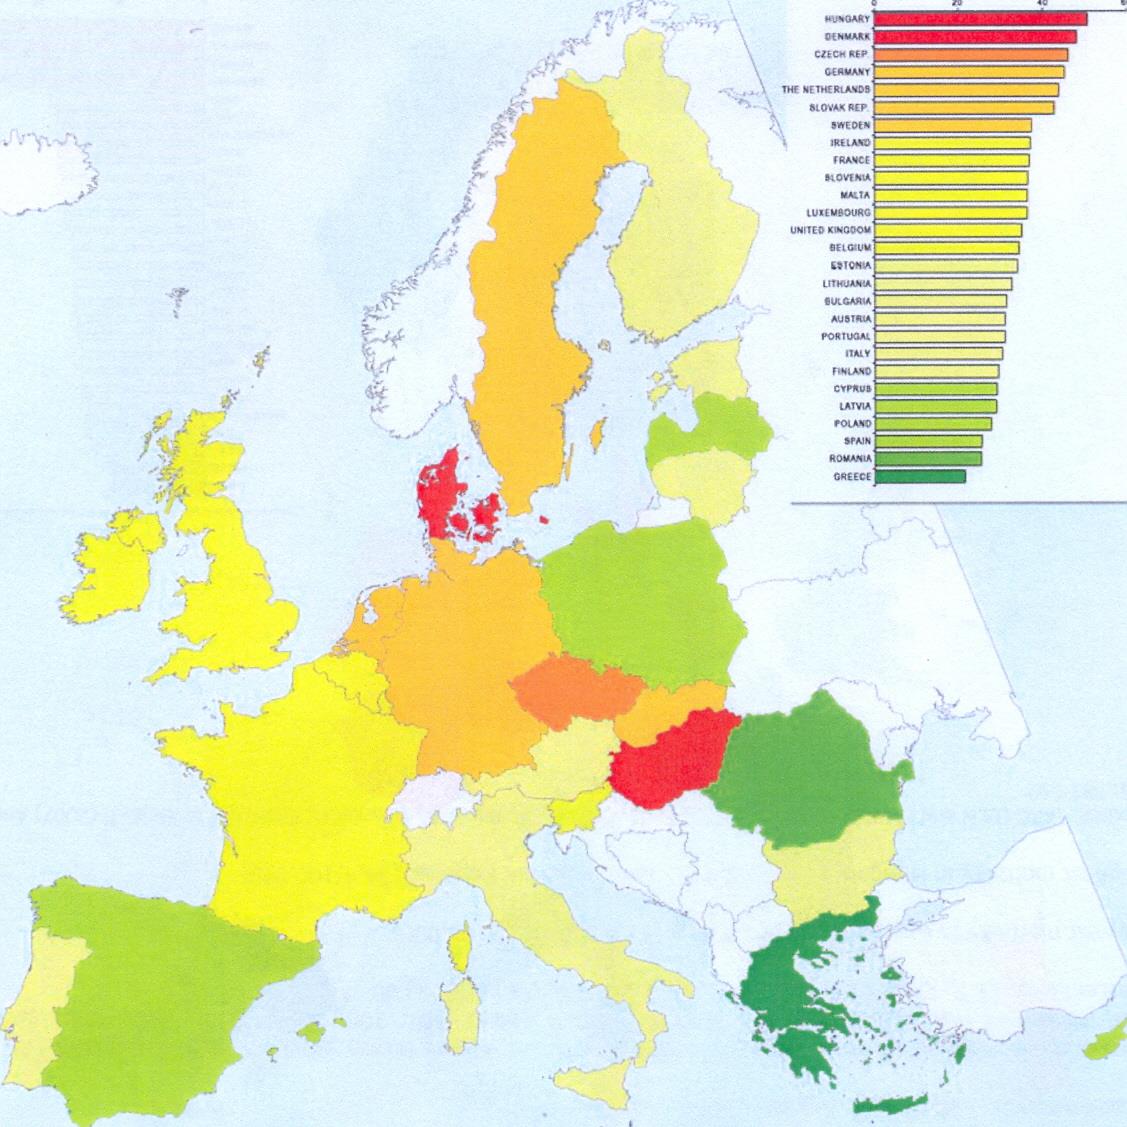 Colorectal cancer incidence in women in the EU Member